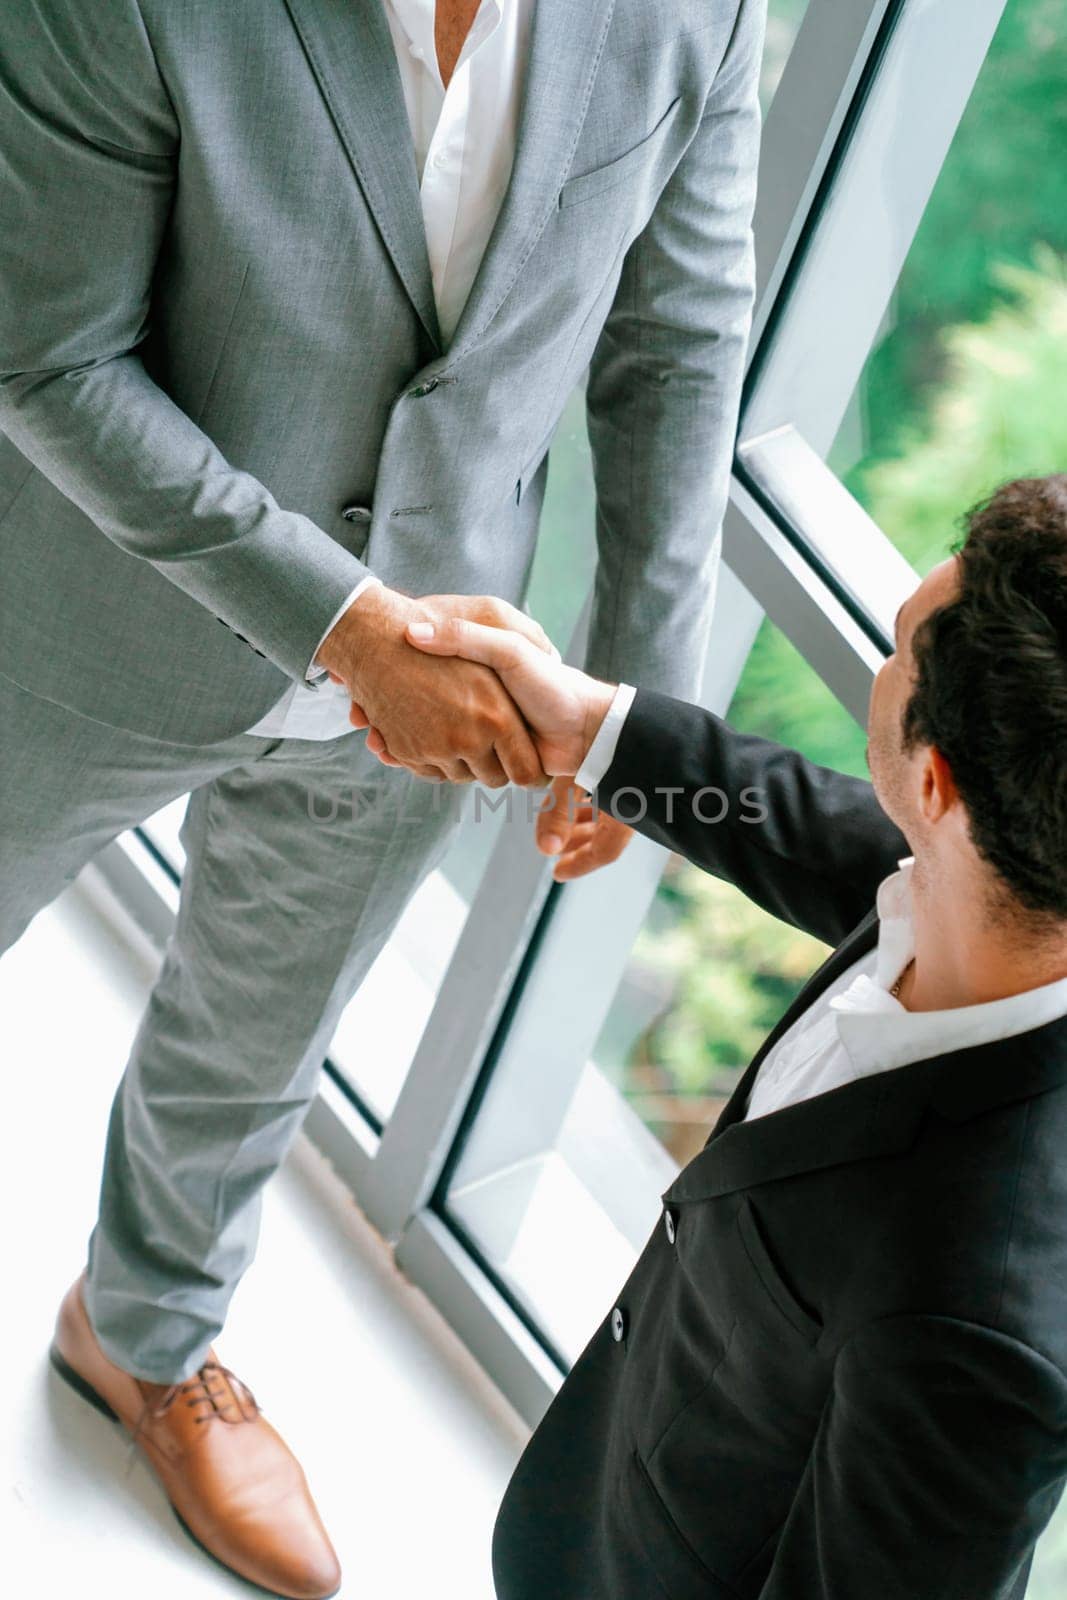 Businessman handshake with another businessman partner in modern workplace office. People corporate business deals concept. uds